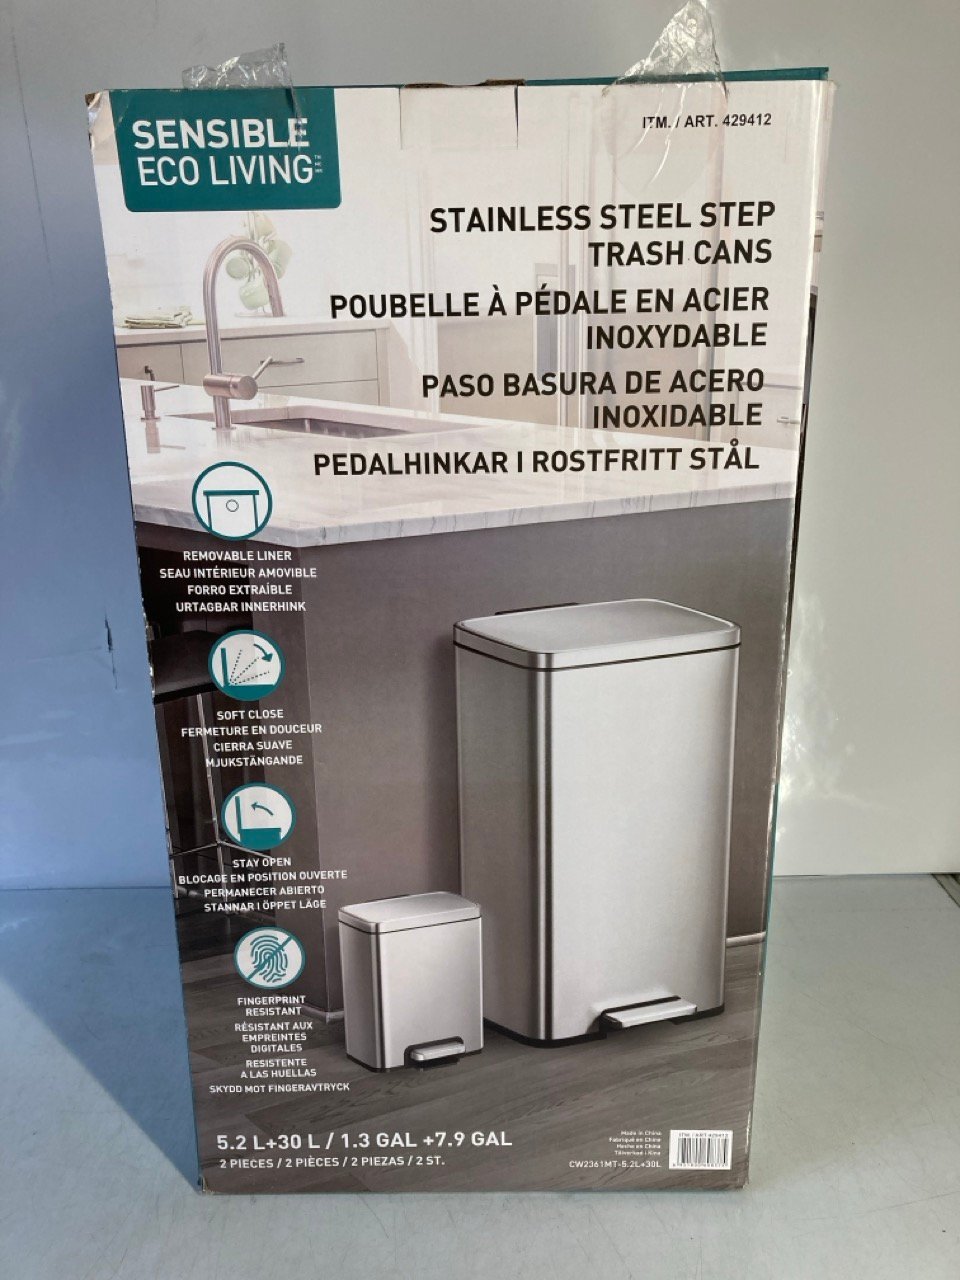 A SENSIBLE ECO LIVING STAINLESS STEEL STEP BIN, 429412